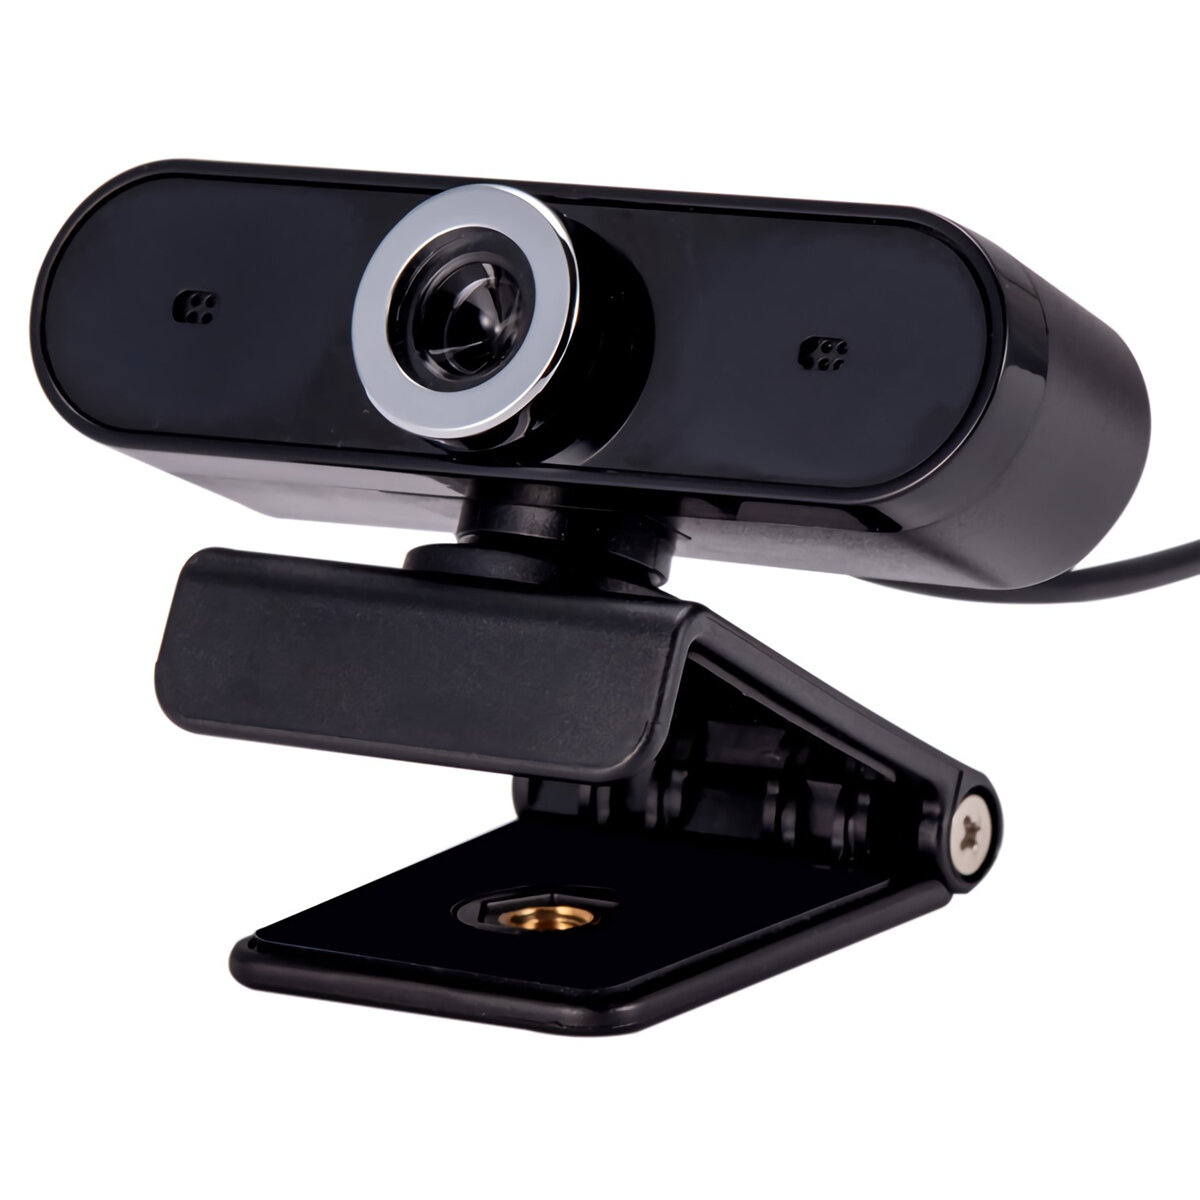 GL68 HD Webcam Video Chat Recording USB Camera Web Camera With HD Mic for Computer Desktop Laptop Online Course Studying Video Conference Webcams